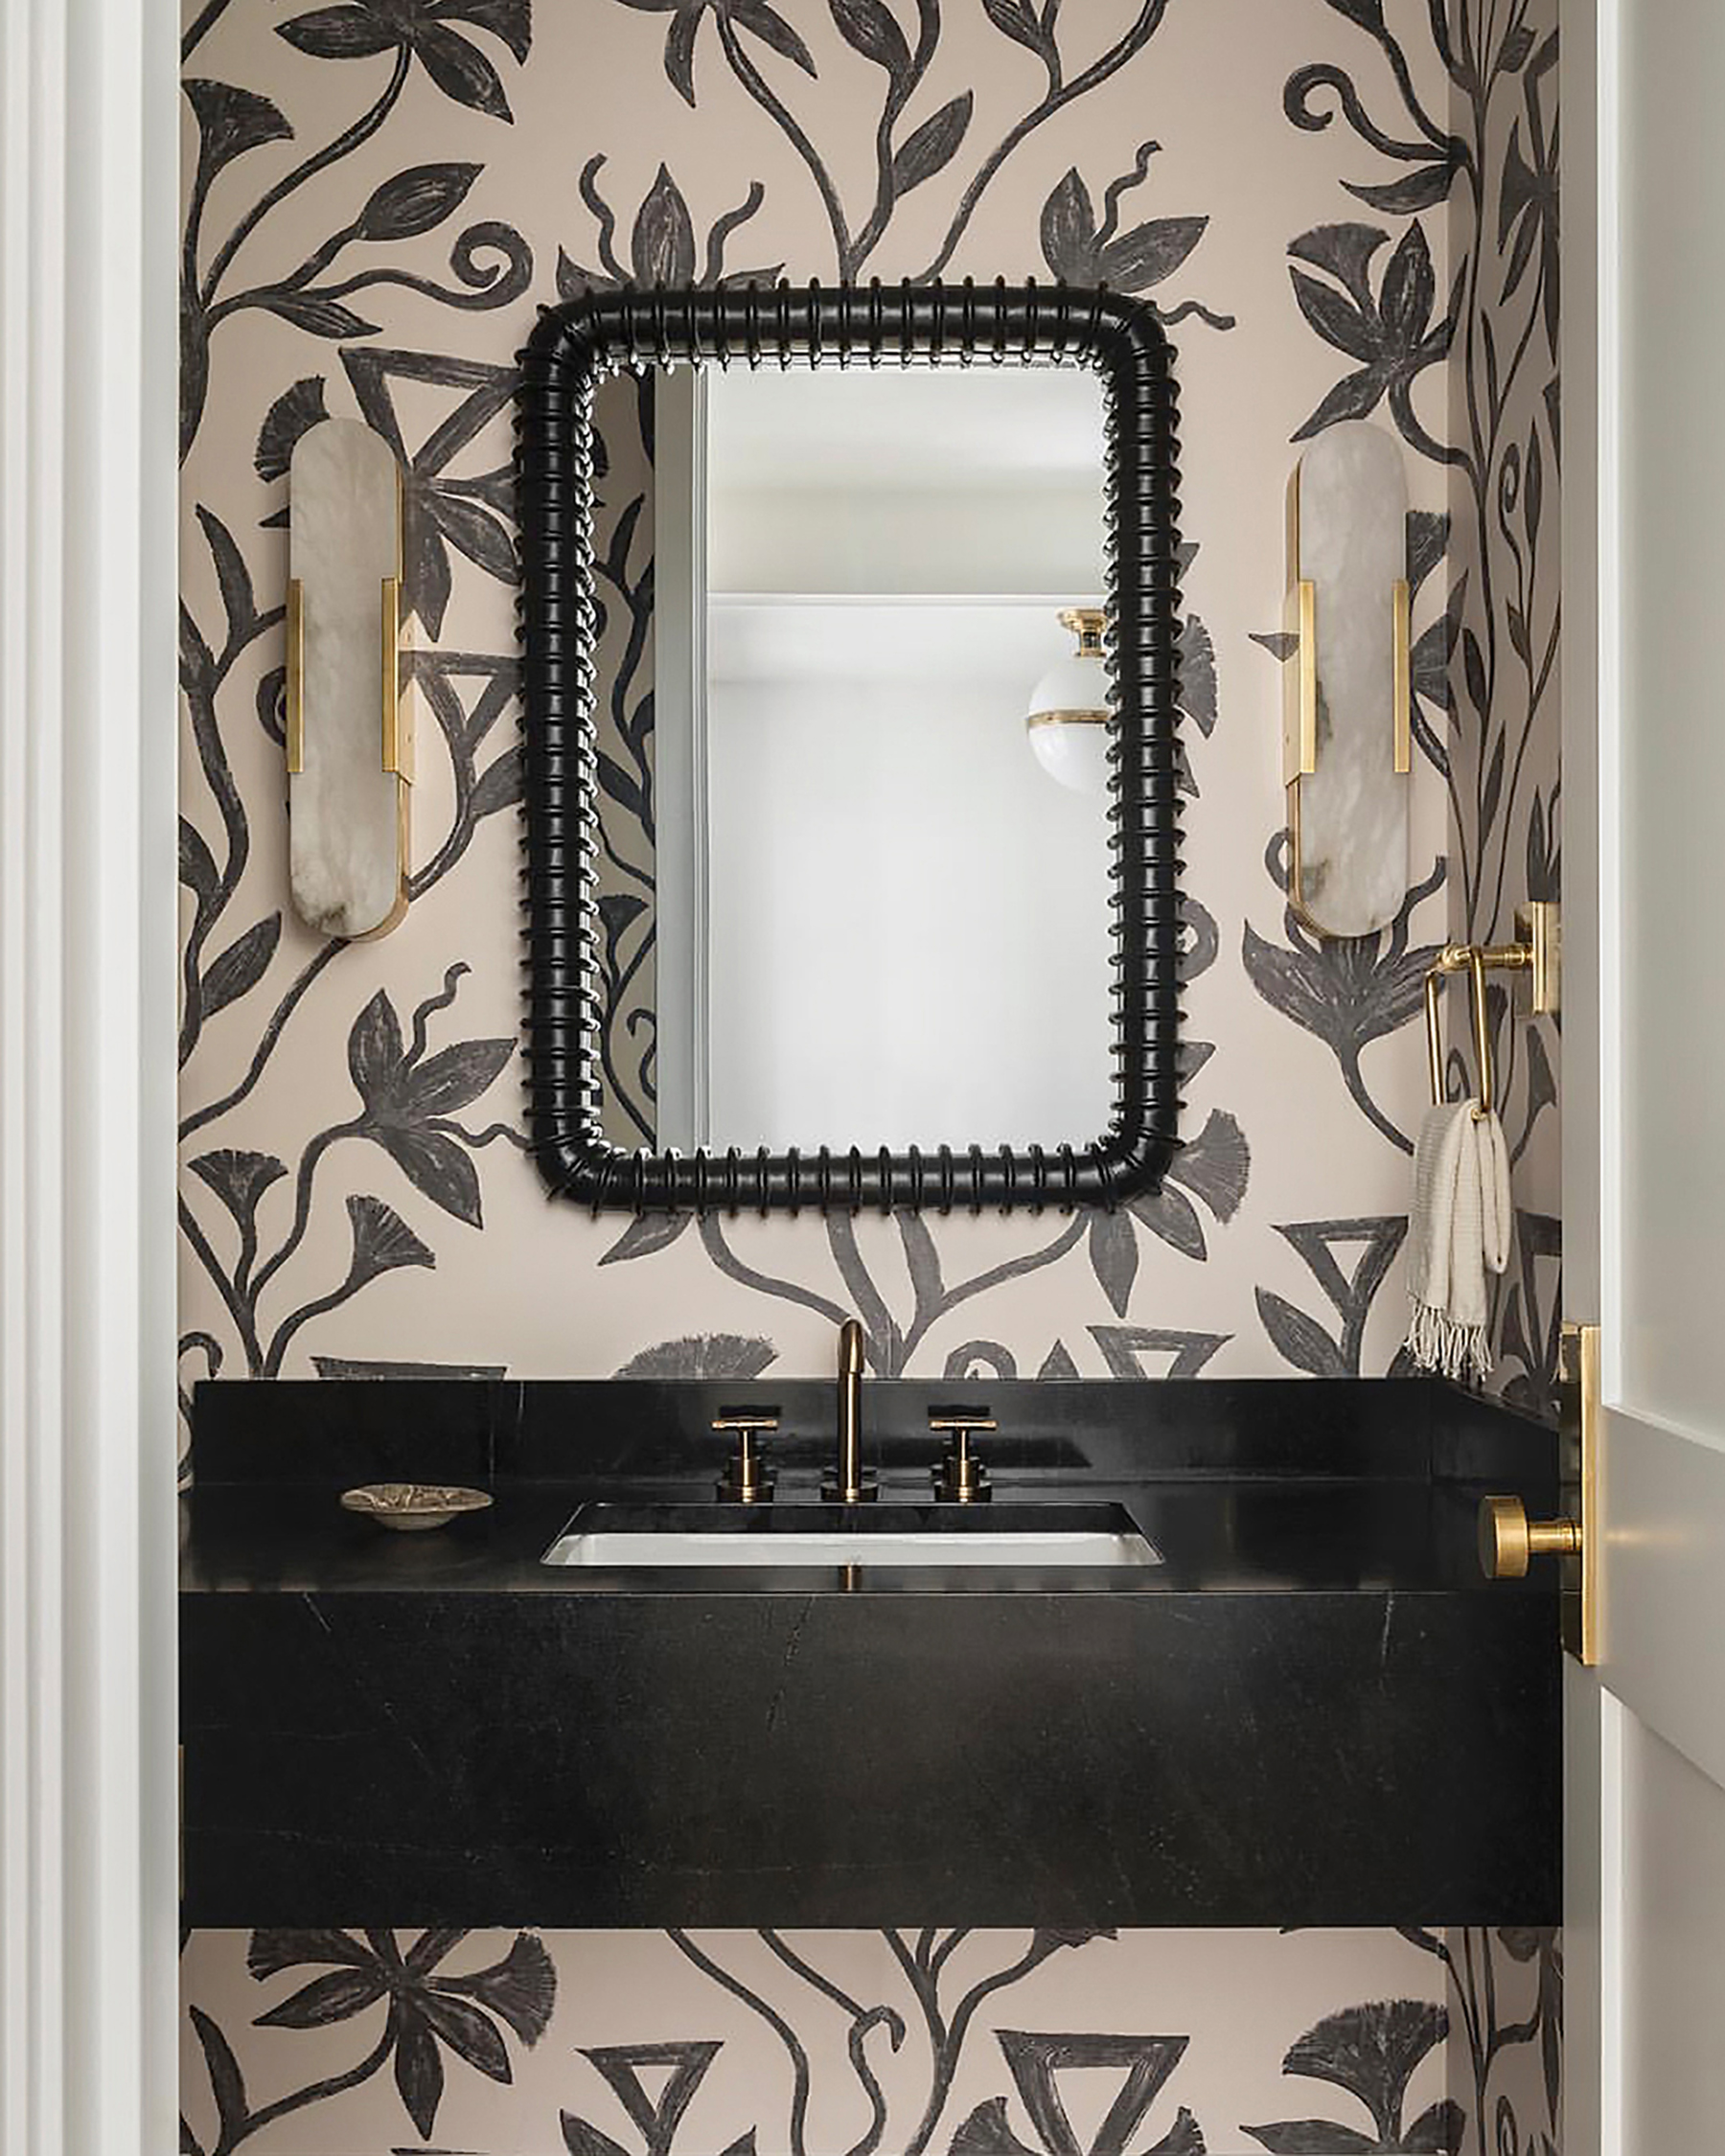 Powder room designed by Brian Paquette with khovar vine wallpaper from l'aviva home.